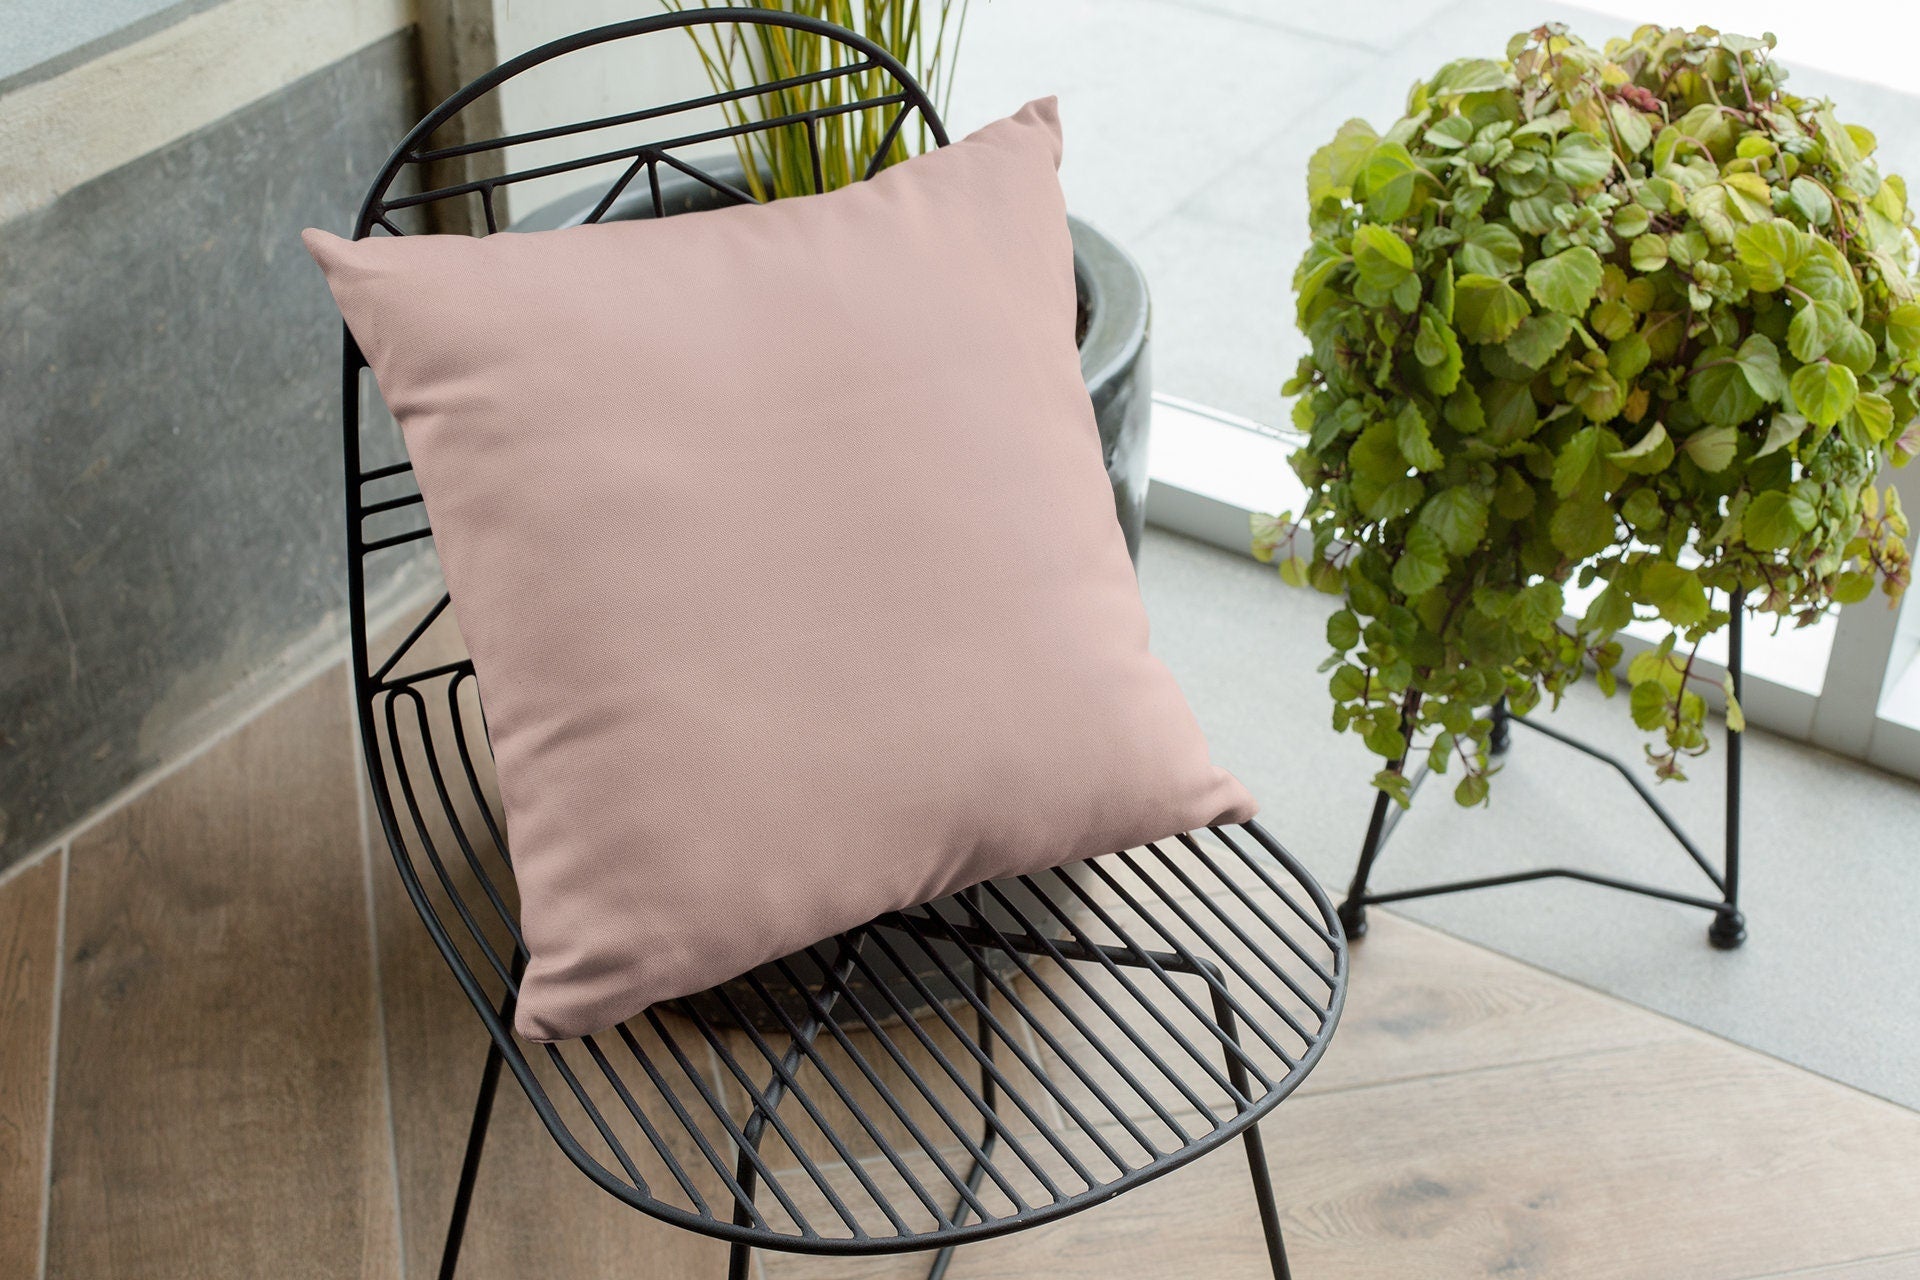 Light Pink Outdoor Pillow, Insert Included, Outdoor Patio Decor